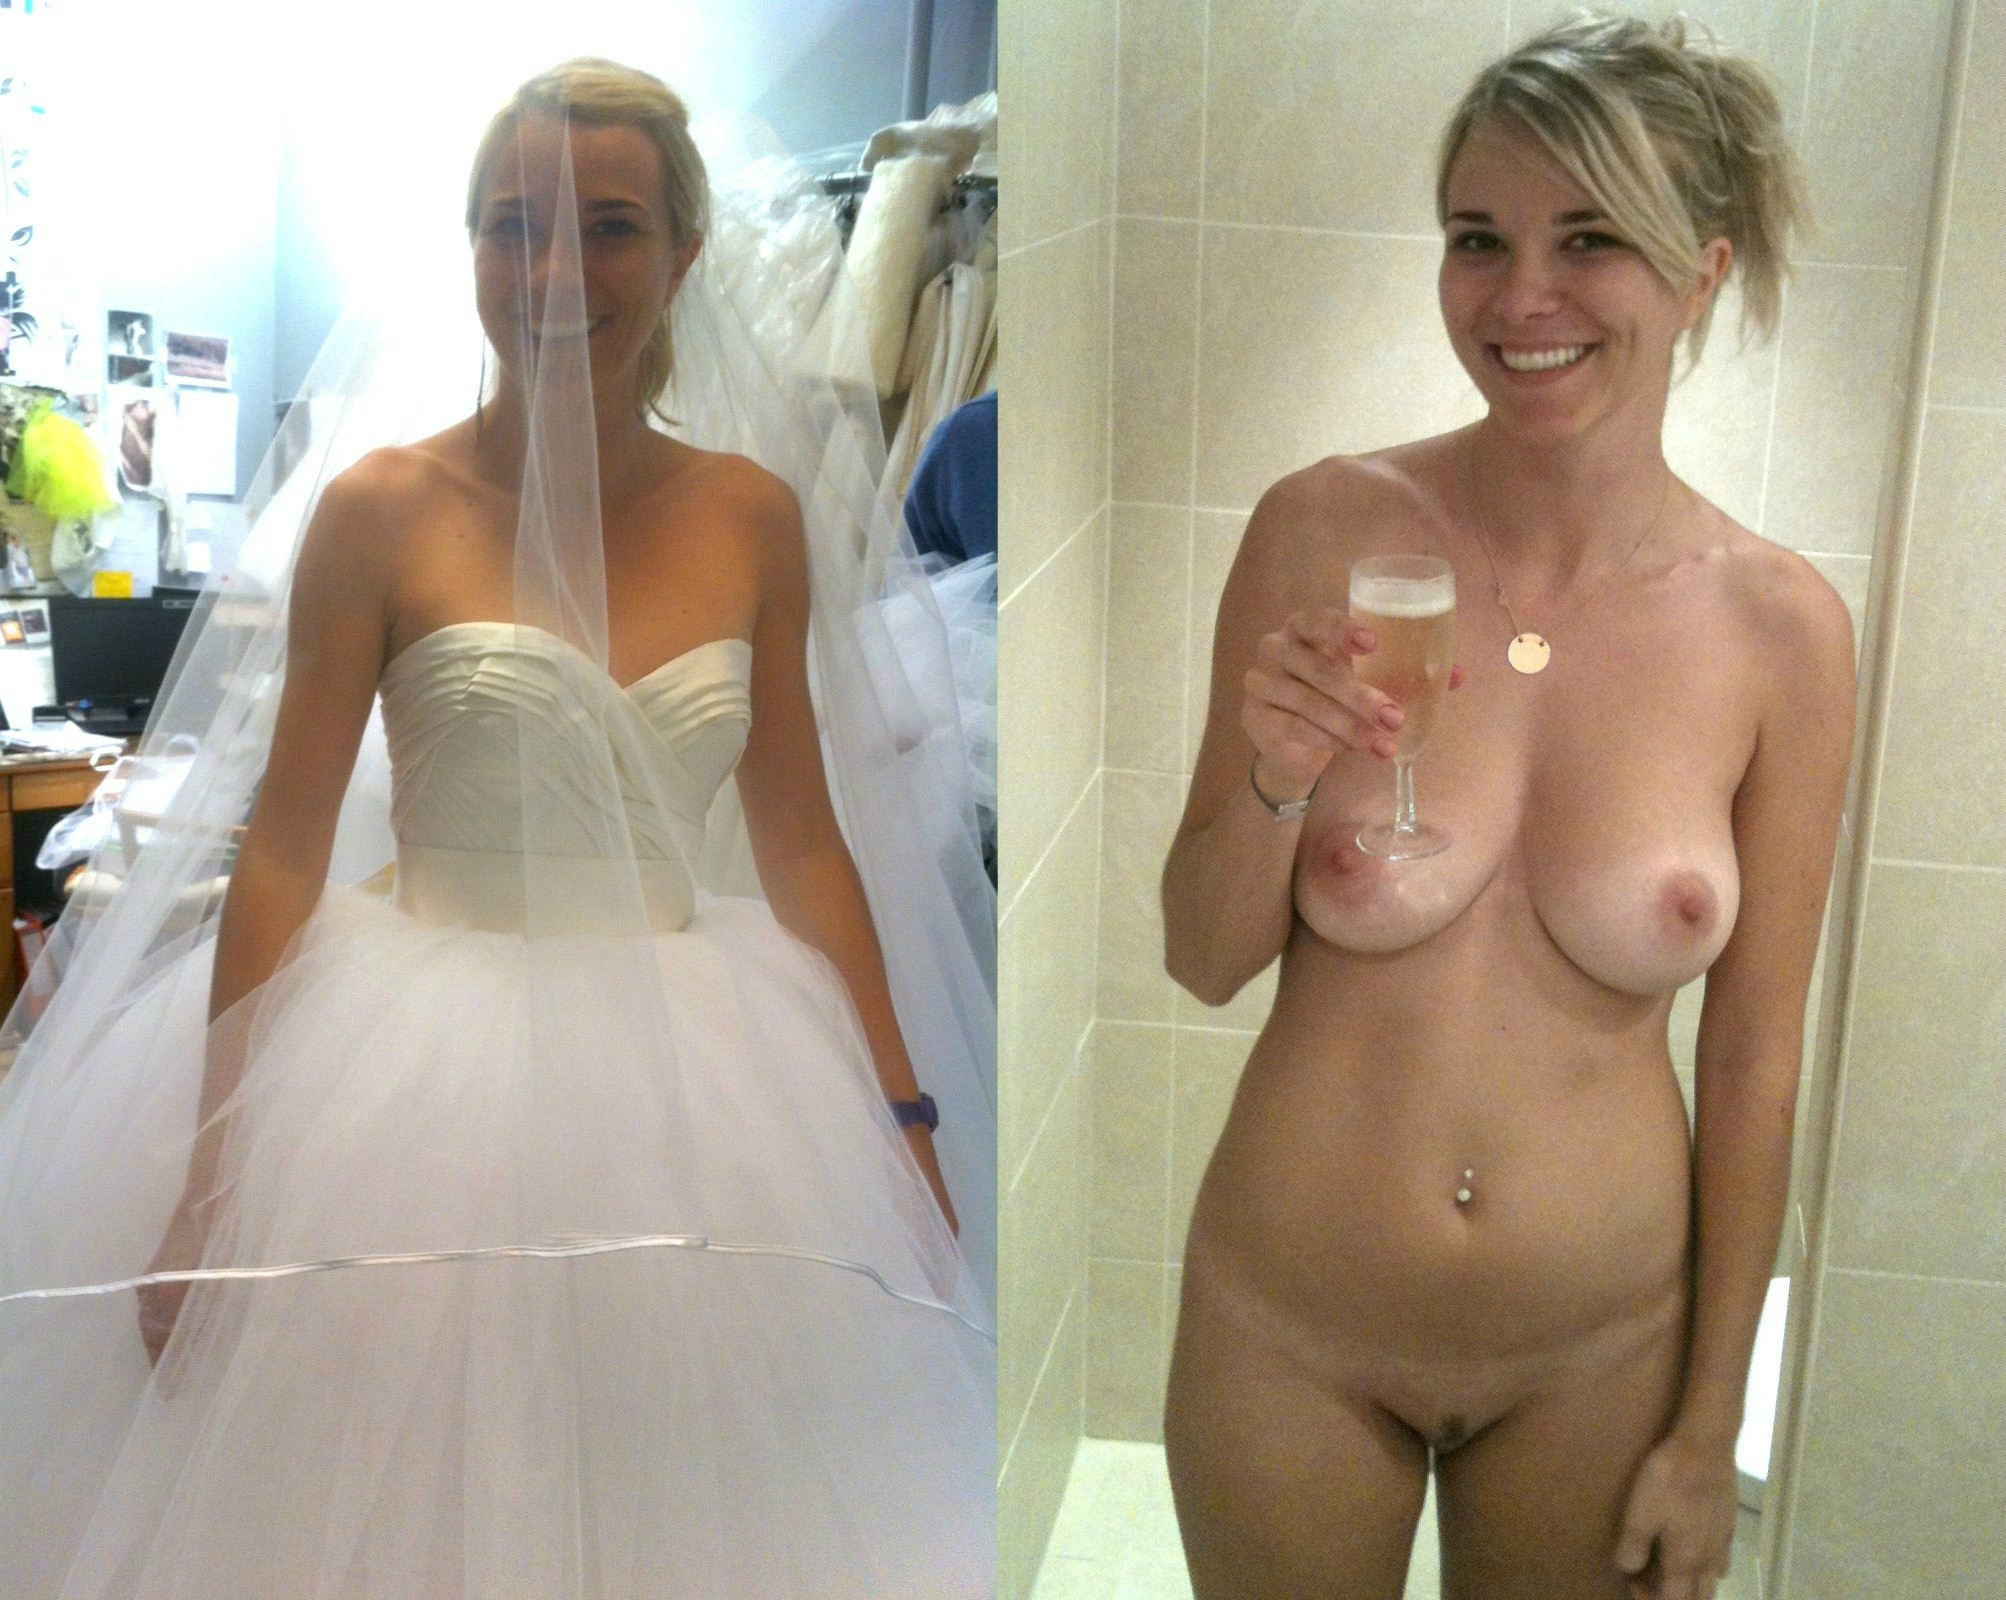 Before and After the Wedding Porn picture photo